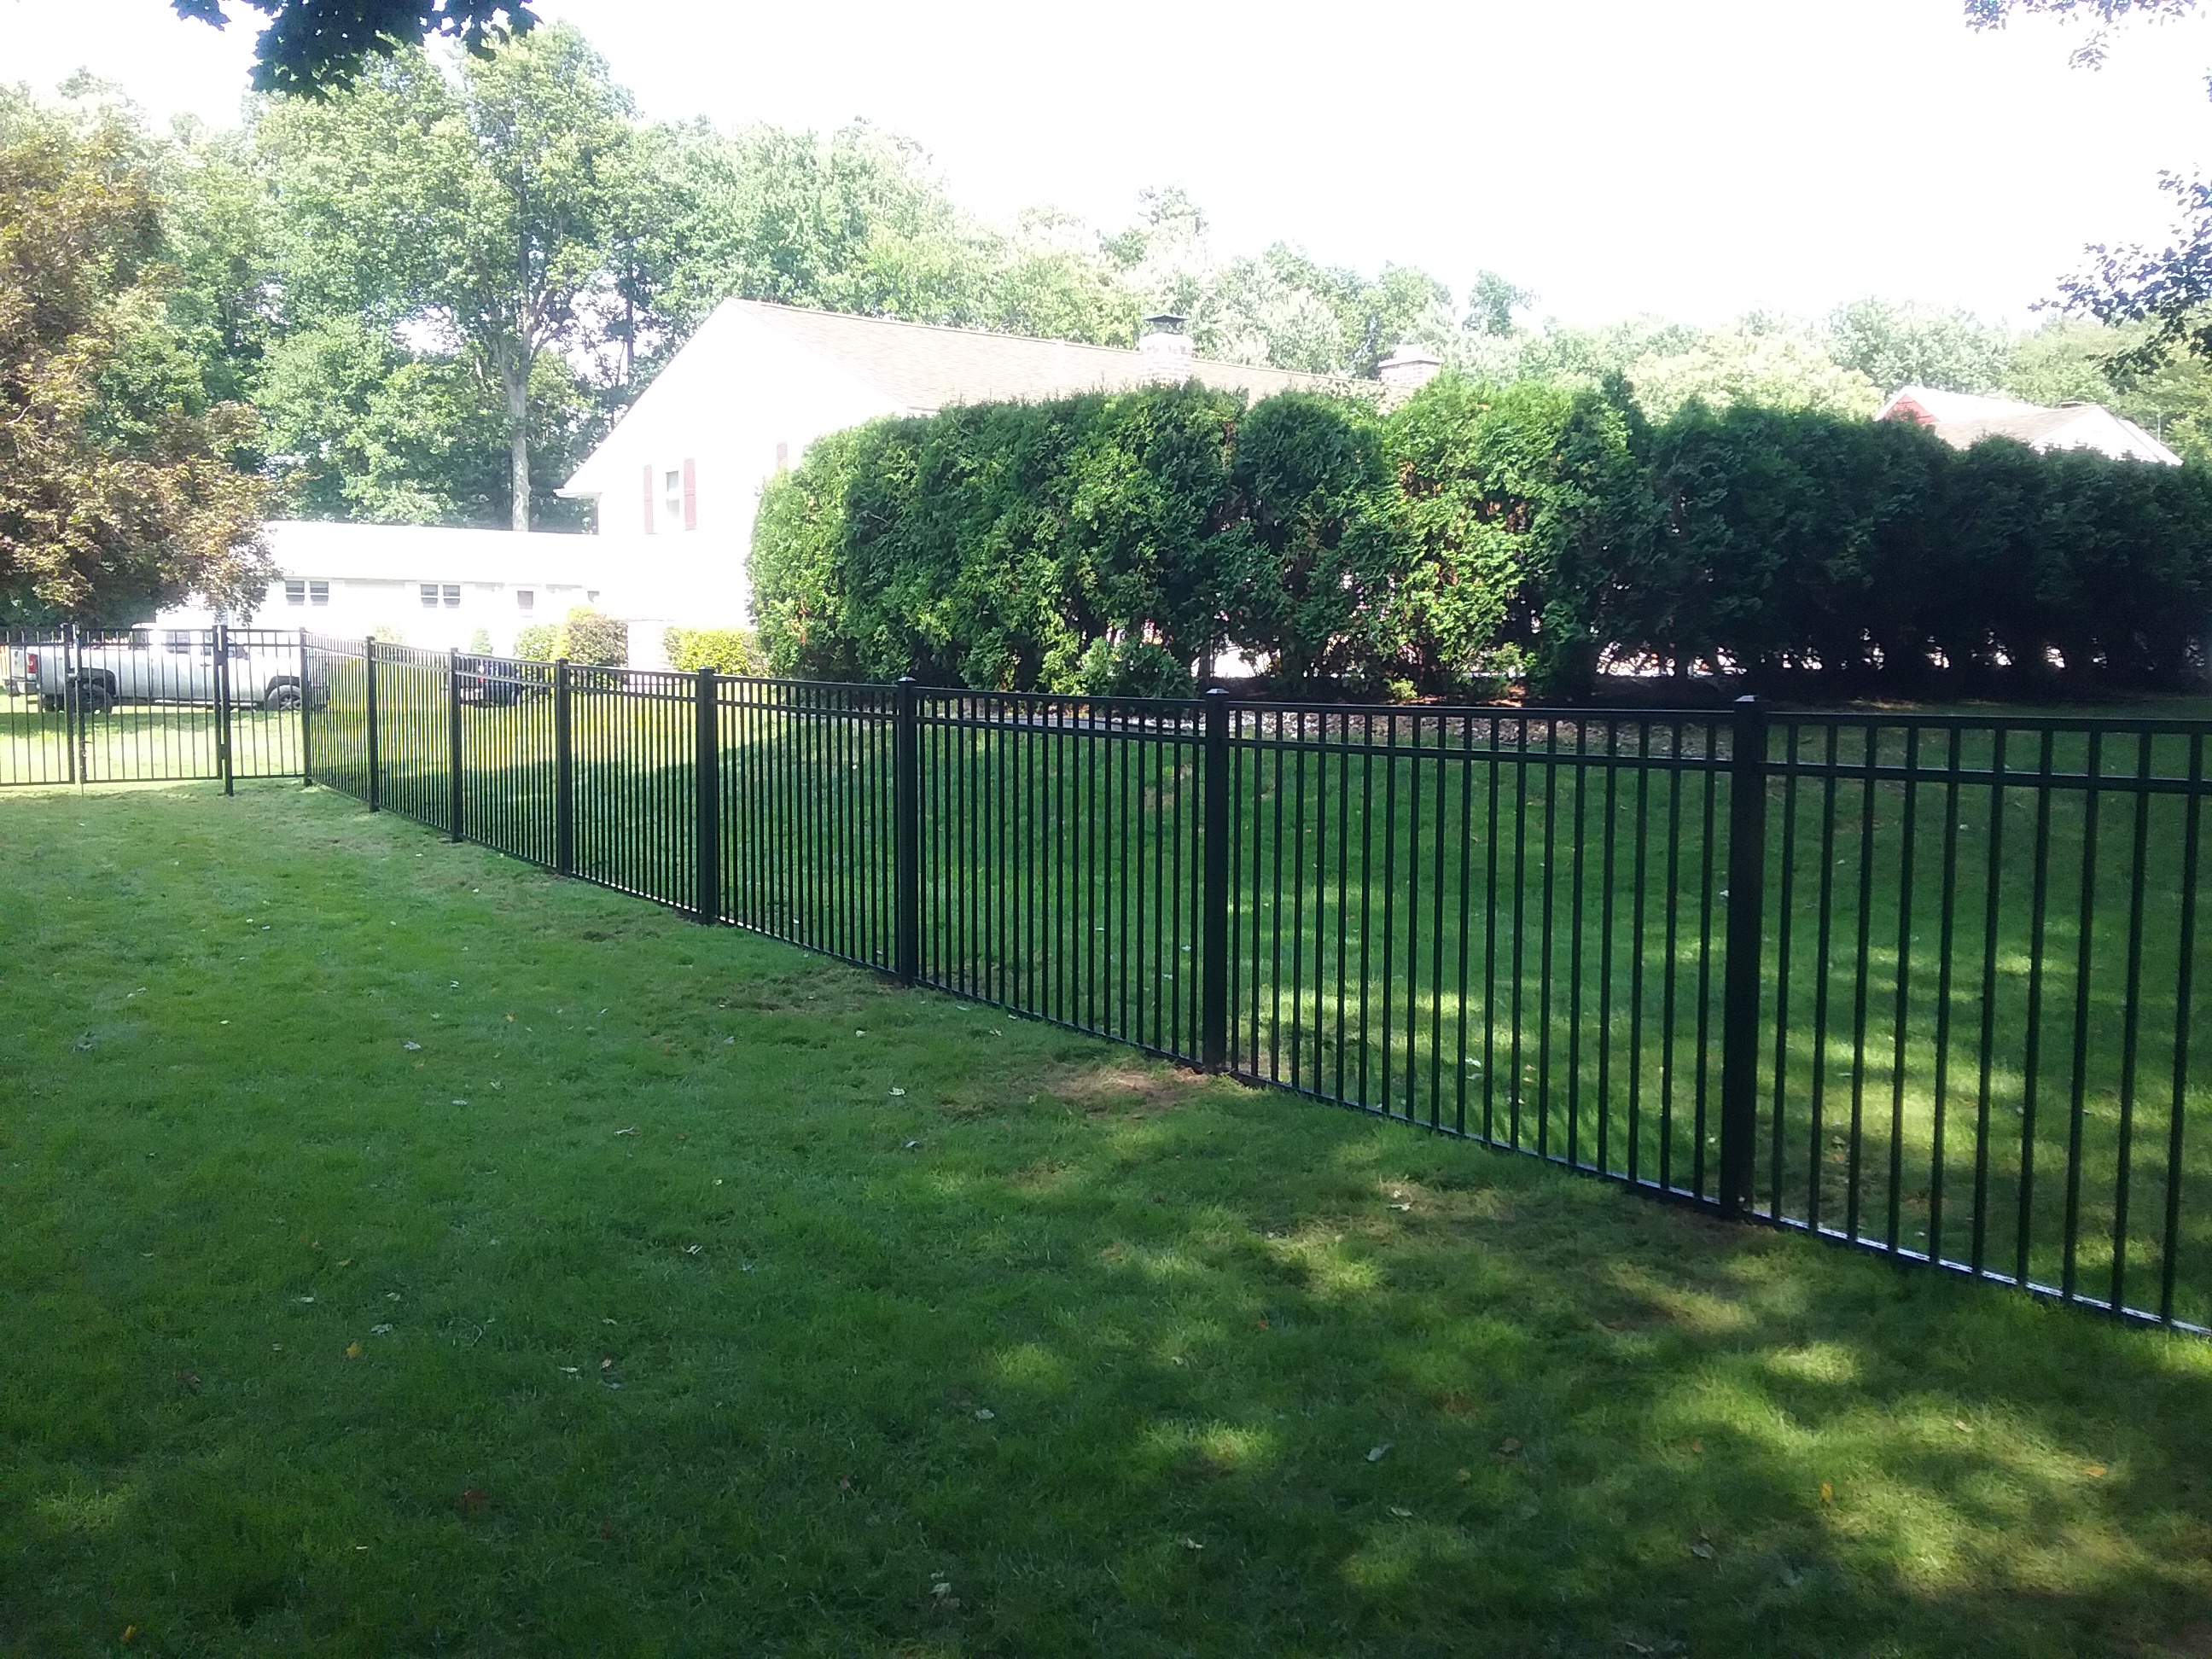 Installing a Fence for Safety and Appearance - Fence It In